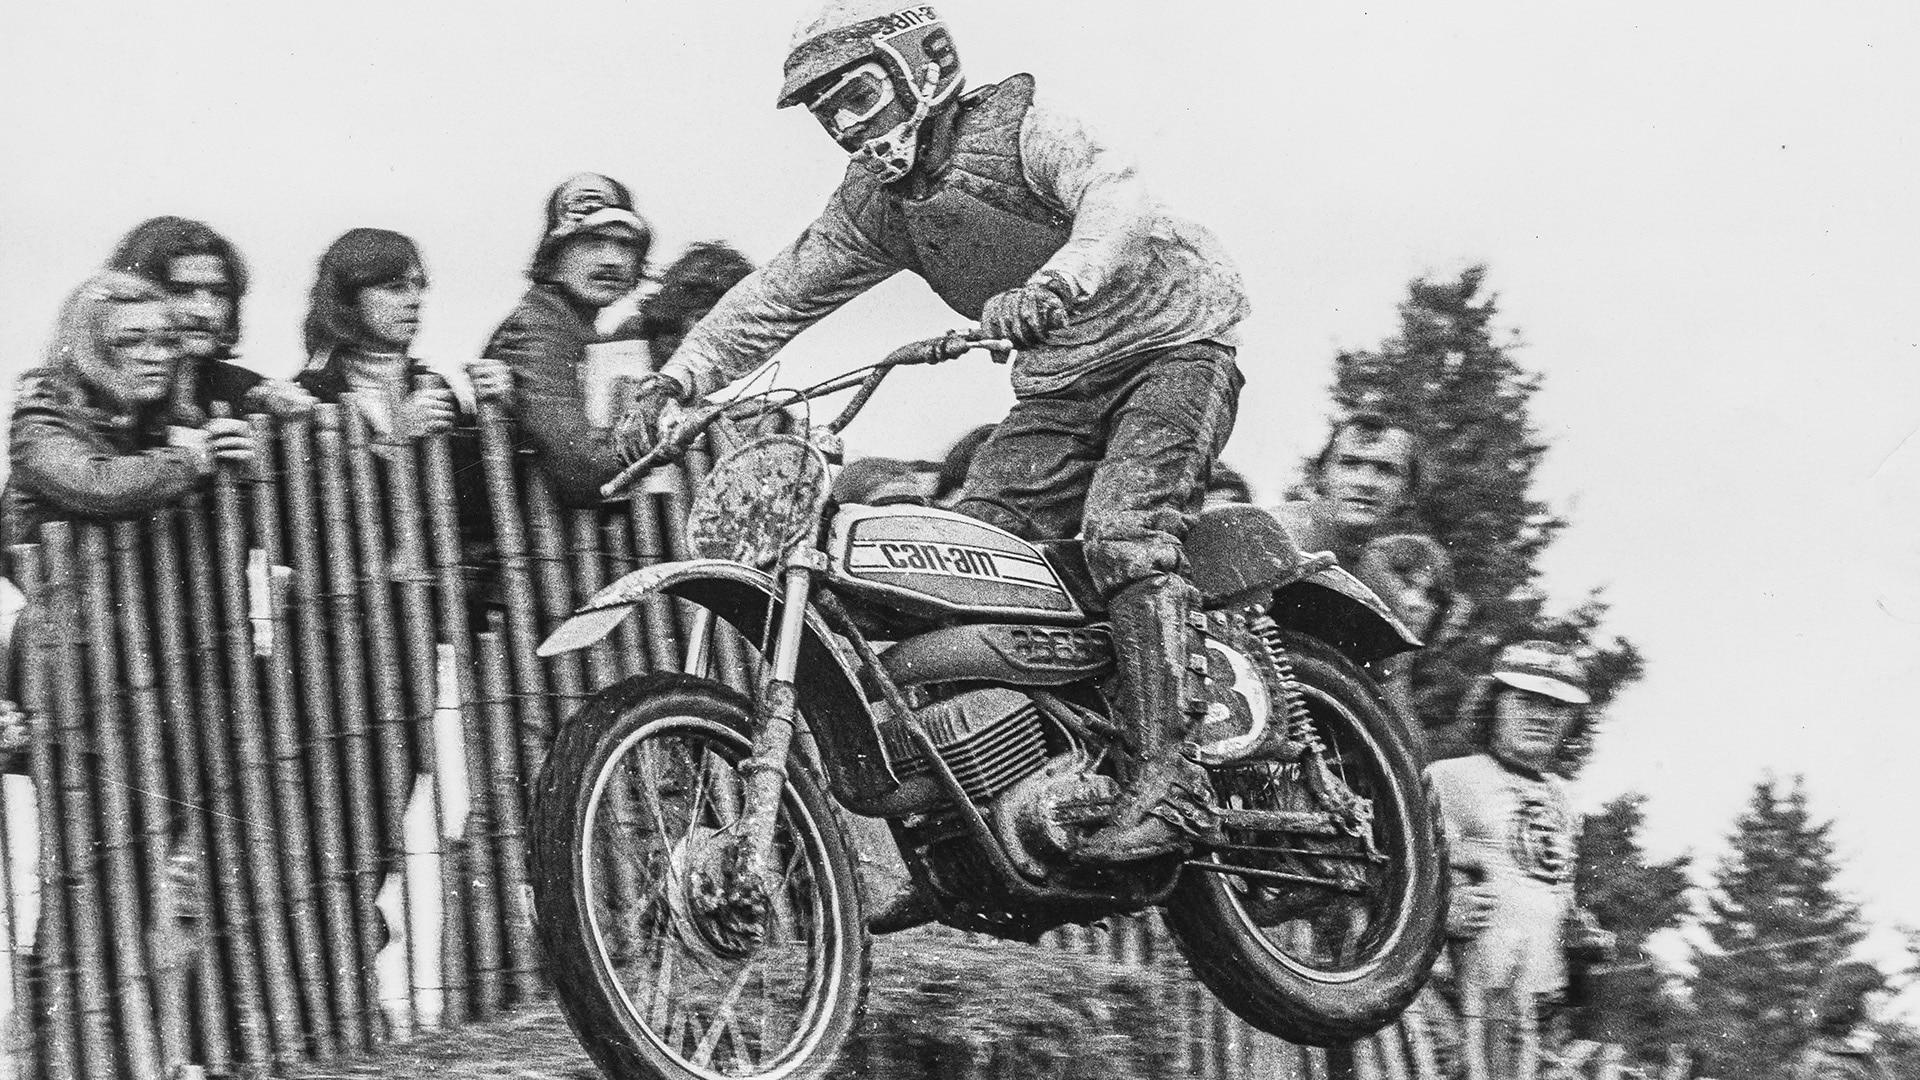 Motocross rider jumping with a classic Can-Am motorcycle